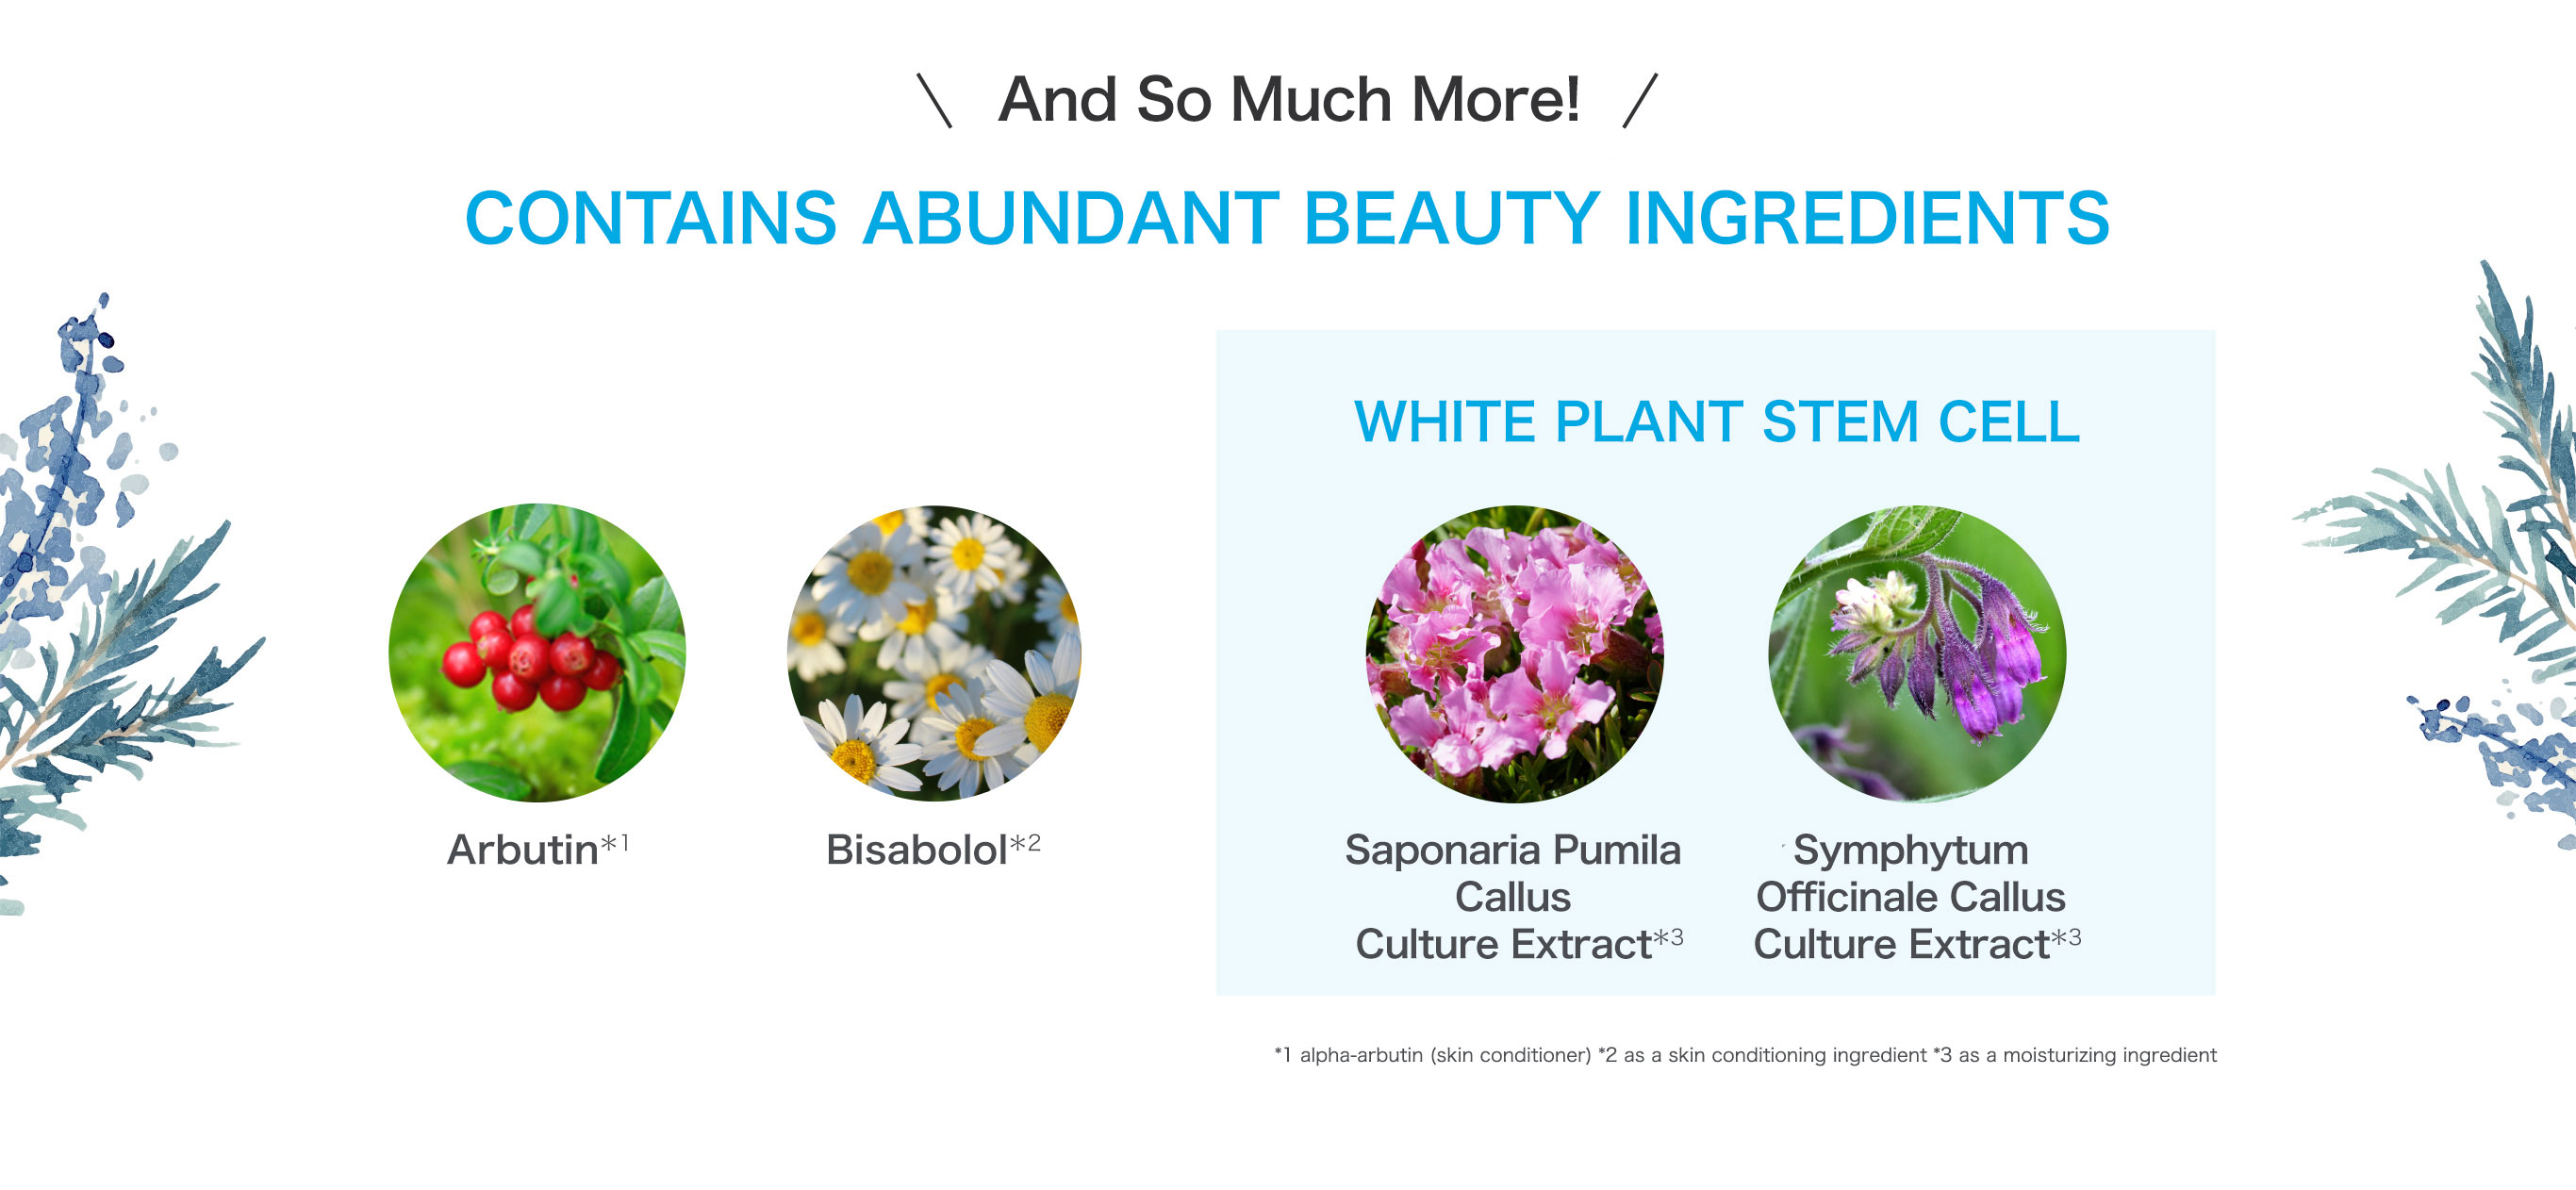 And So Much More! CONTAINS ABUNDANT BEAUTY INGREDIENTS